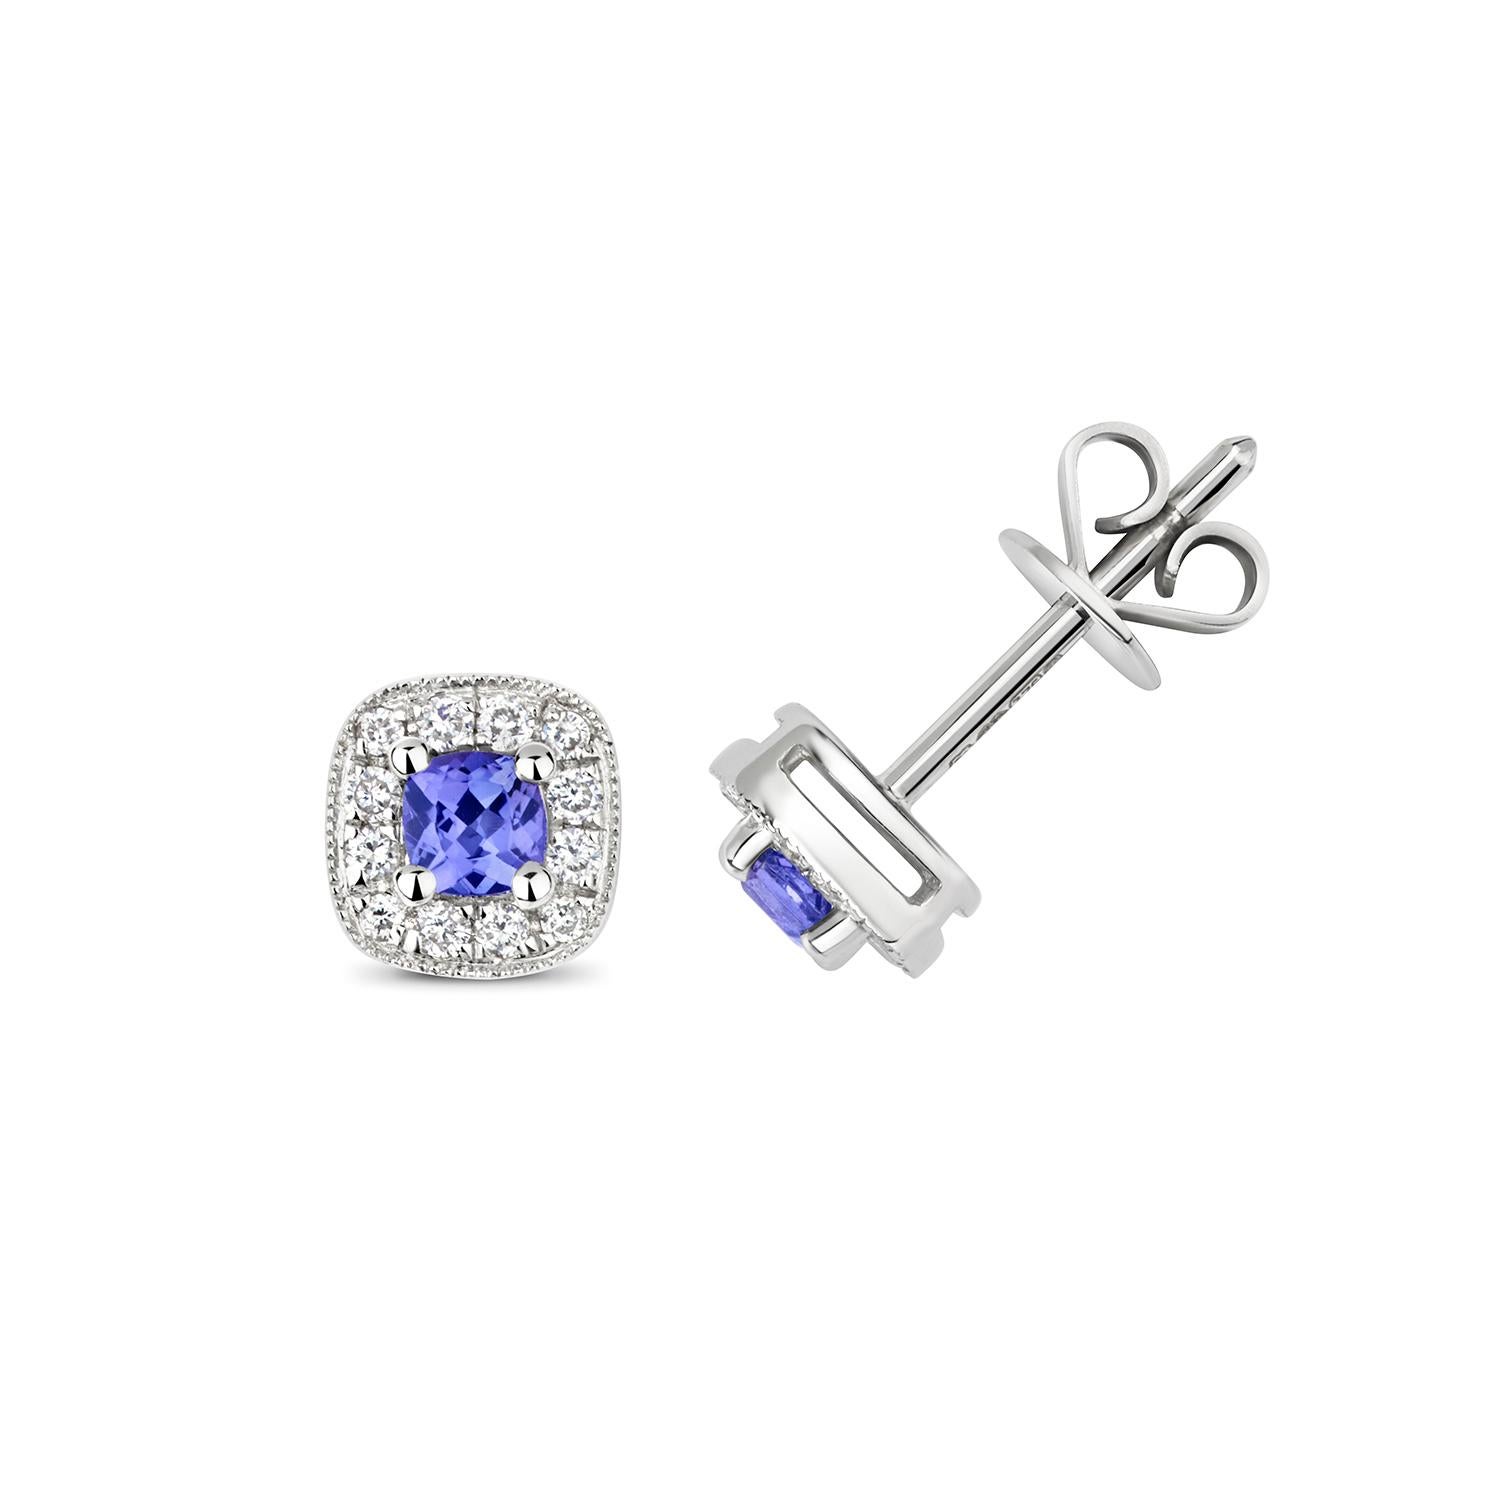 DIAMOND AND TANZANITE CUSHION STUDS

9CT W/G 24RD/0.15 2TAN/0.30

Weight: 1.4g

Number Of Stones:2+24

Total Carates:0.300+0.150